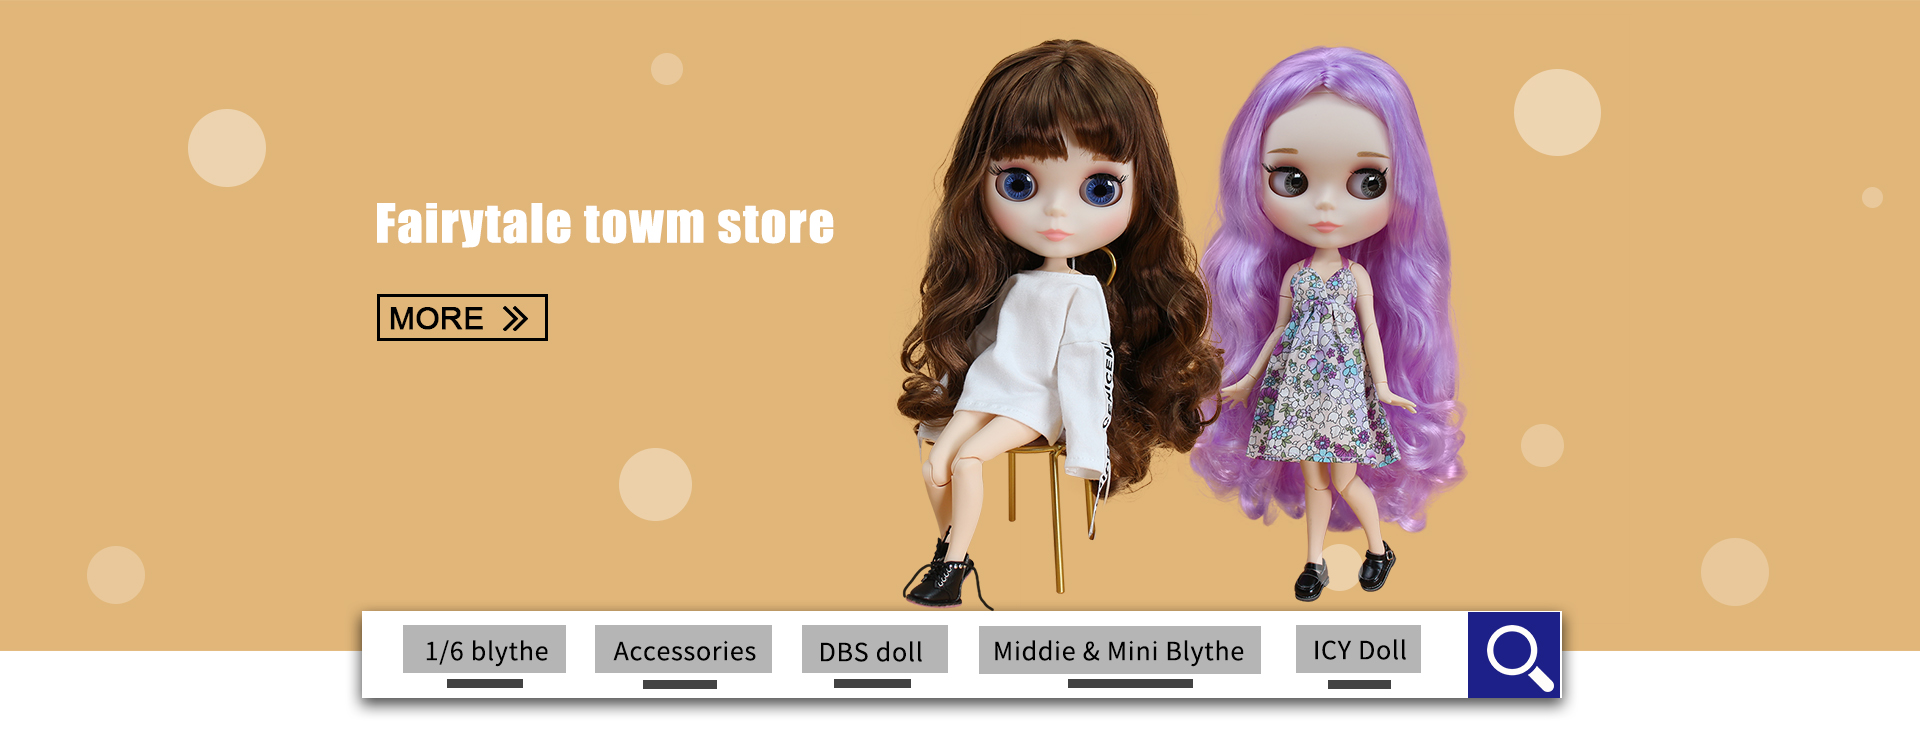 Fairytale Town Store - Amazing products with exclusive discounts 